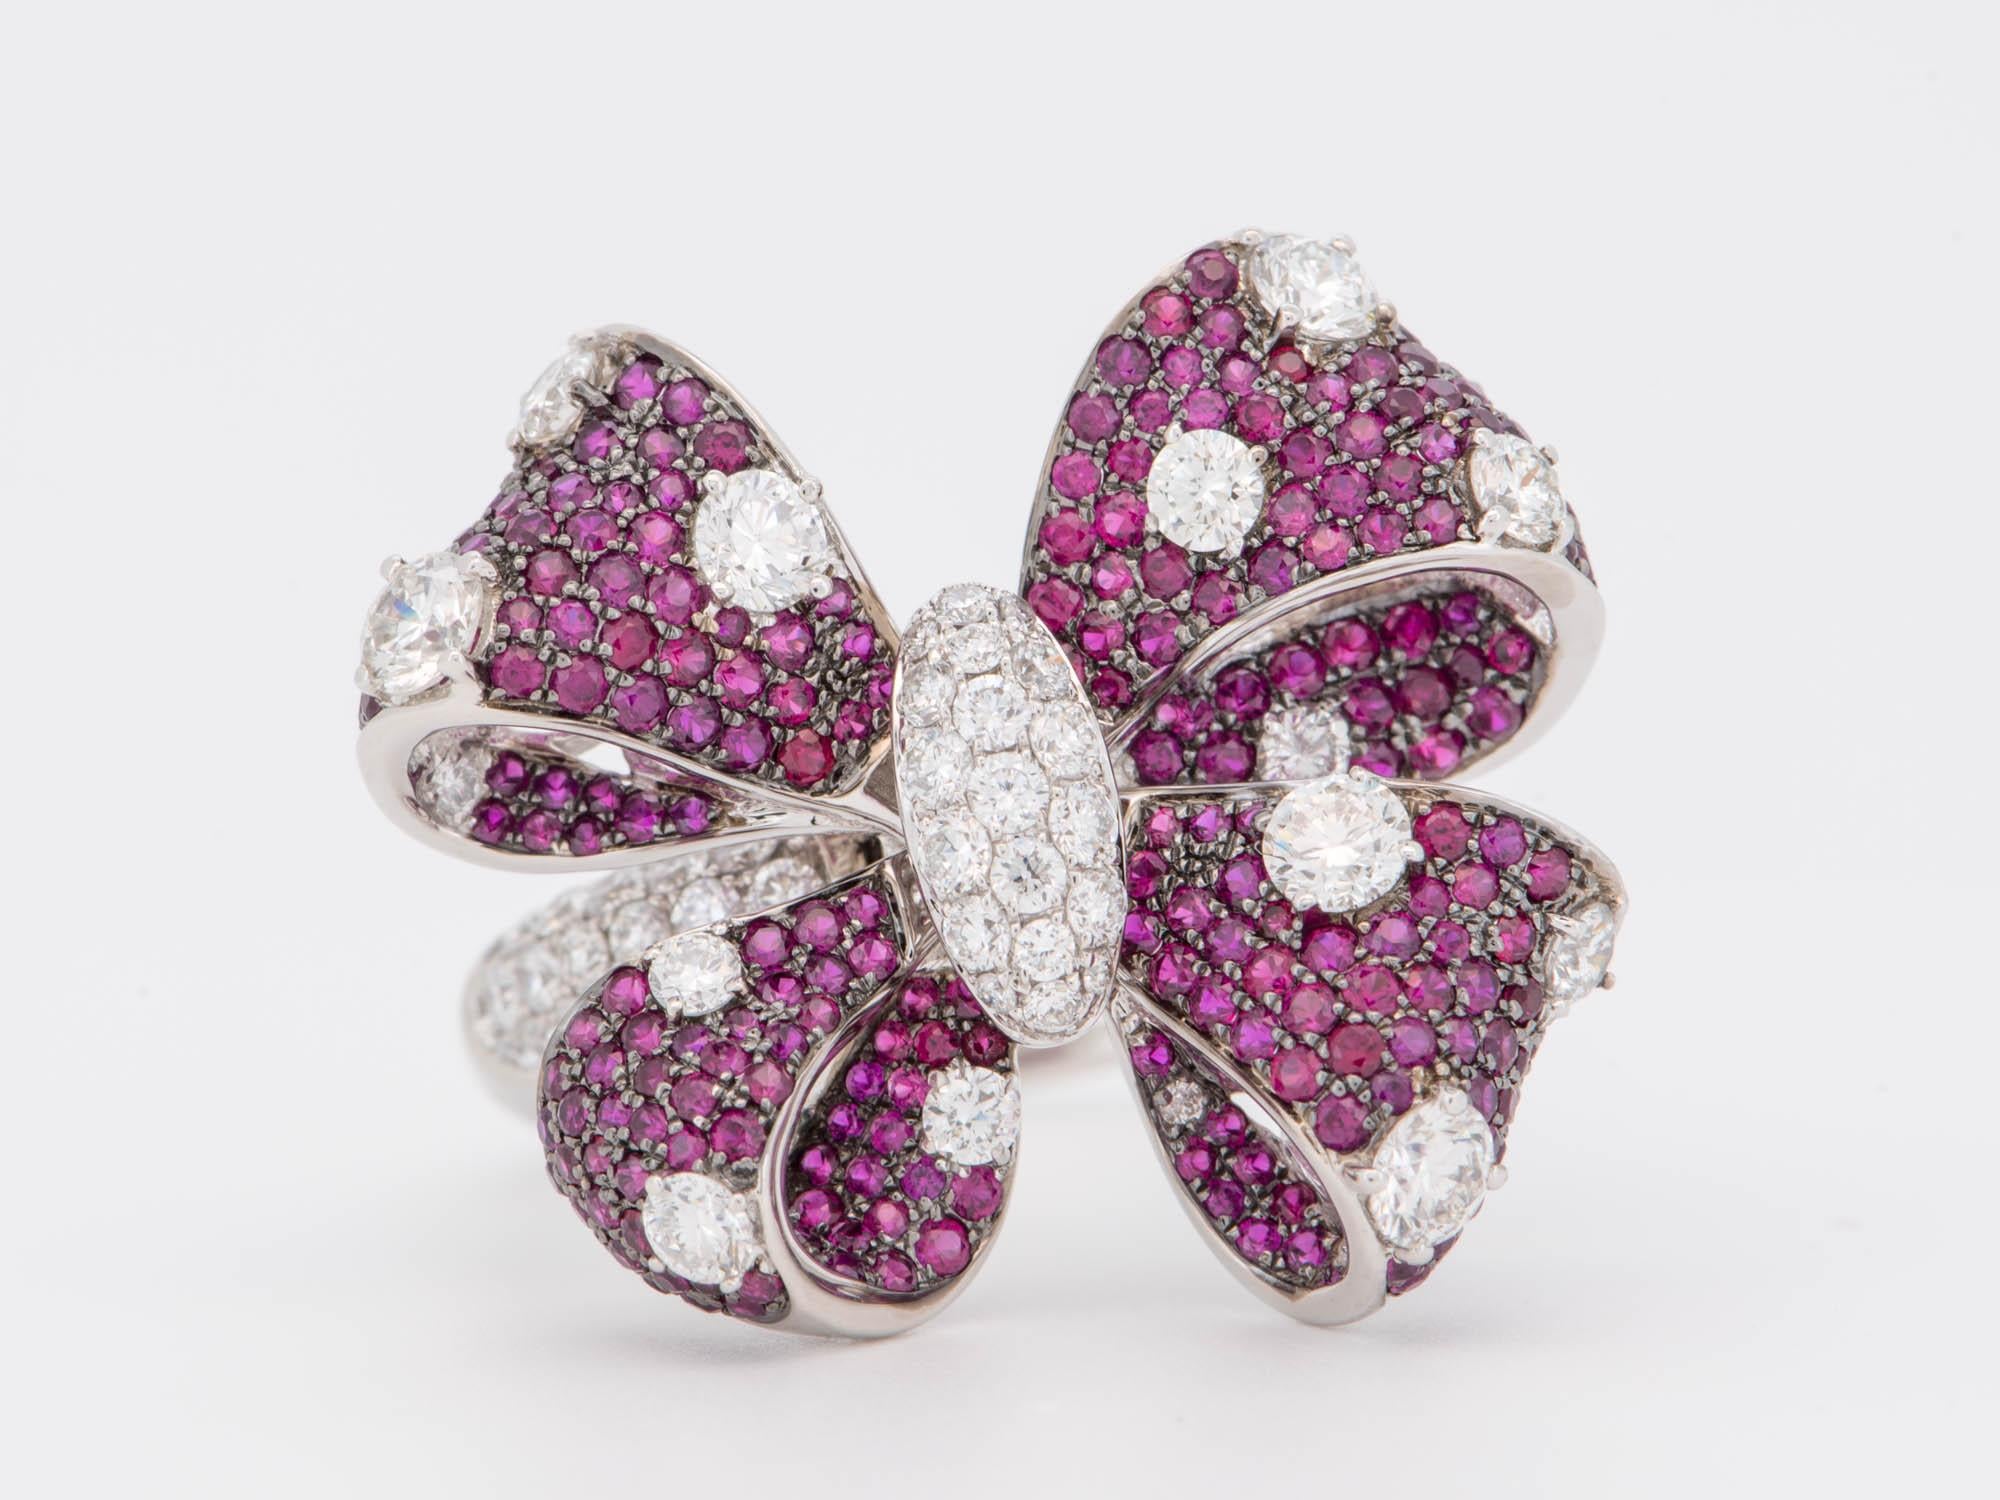 ♥ It's a stunning ring in the style of a bow tie, fully set with rubies and diamonds
♥ The bow tie ring head can be removed from the band and be worn as a pendant. We also included a pin attachment (made from 18K gold) that can be attached to the